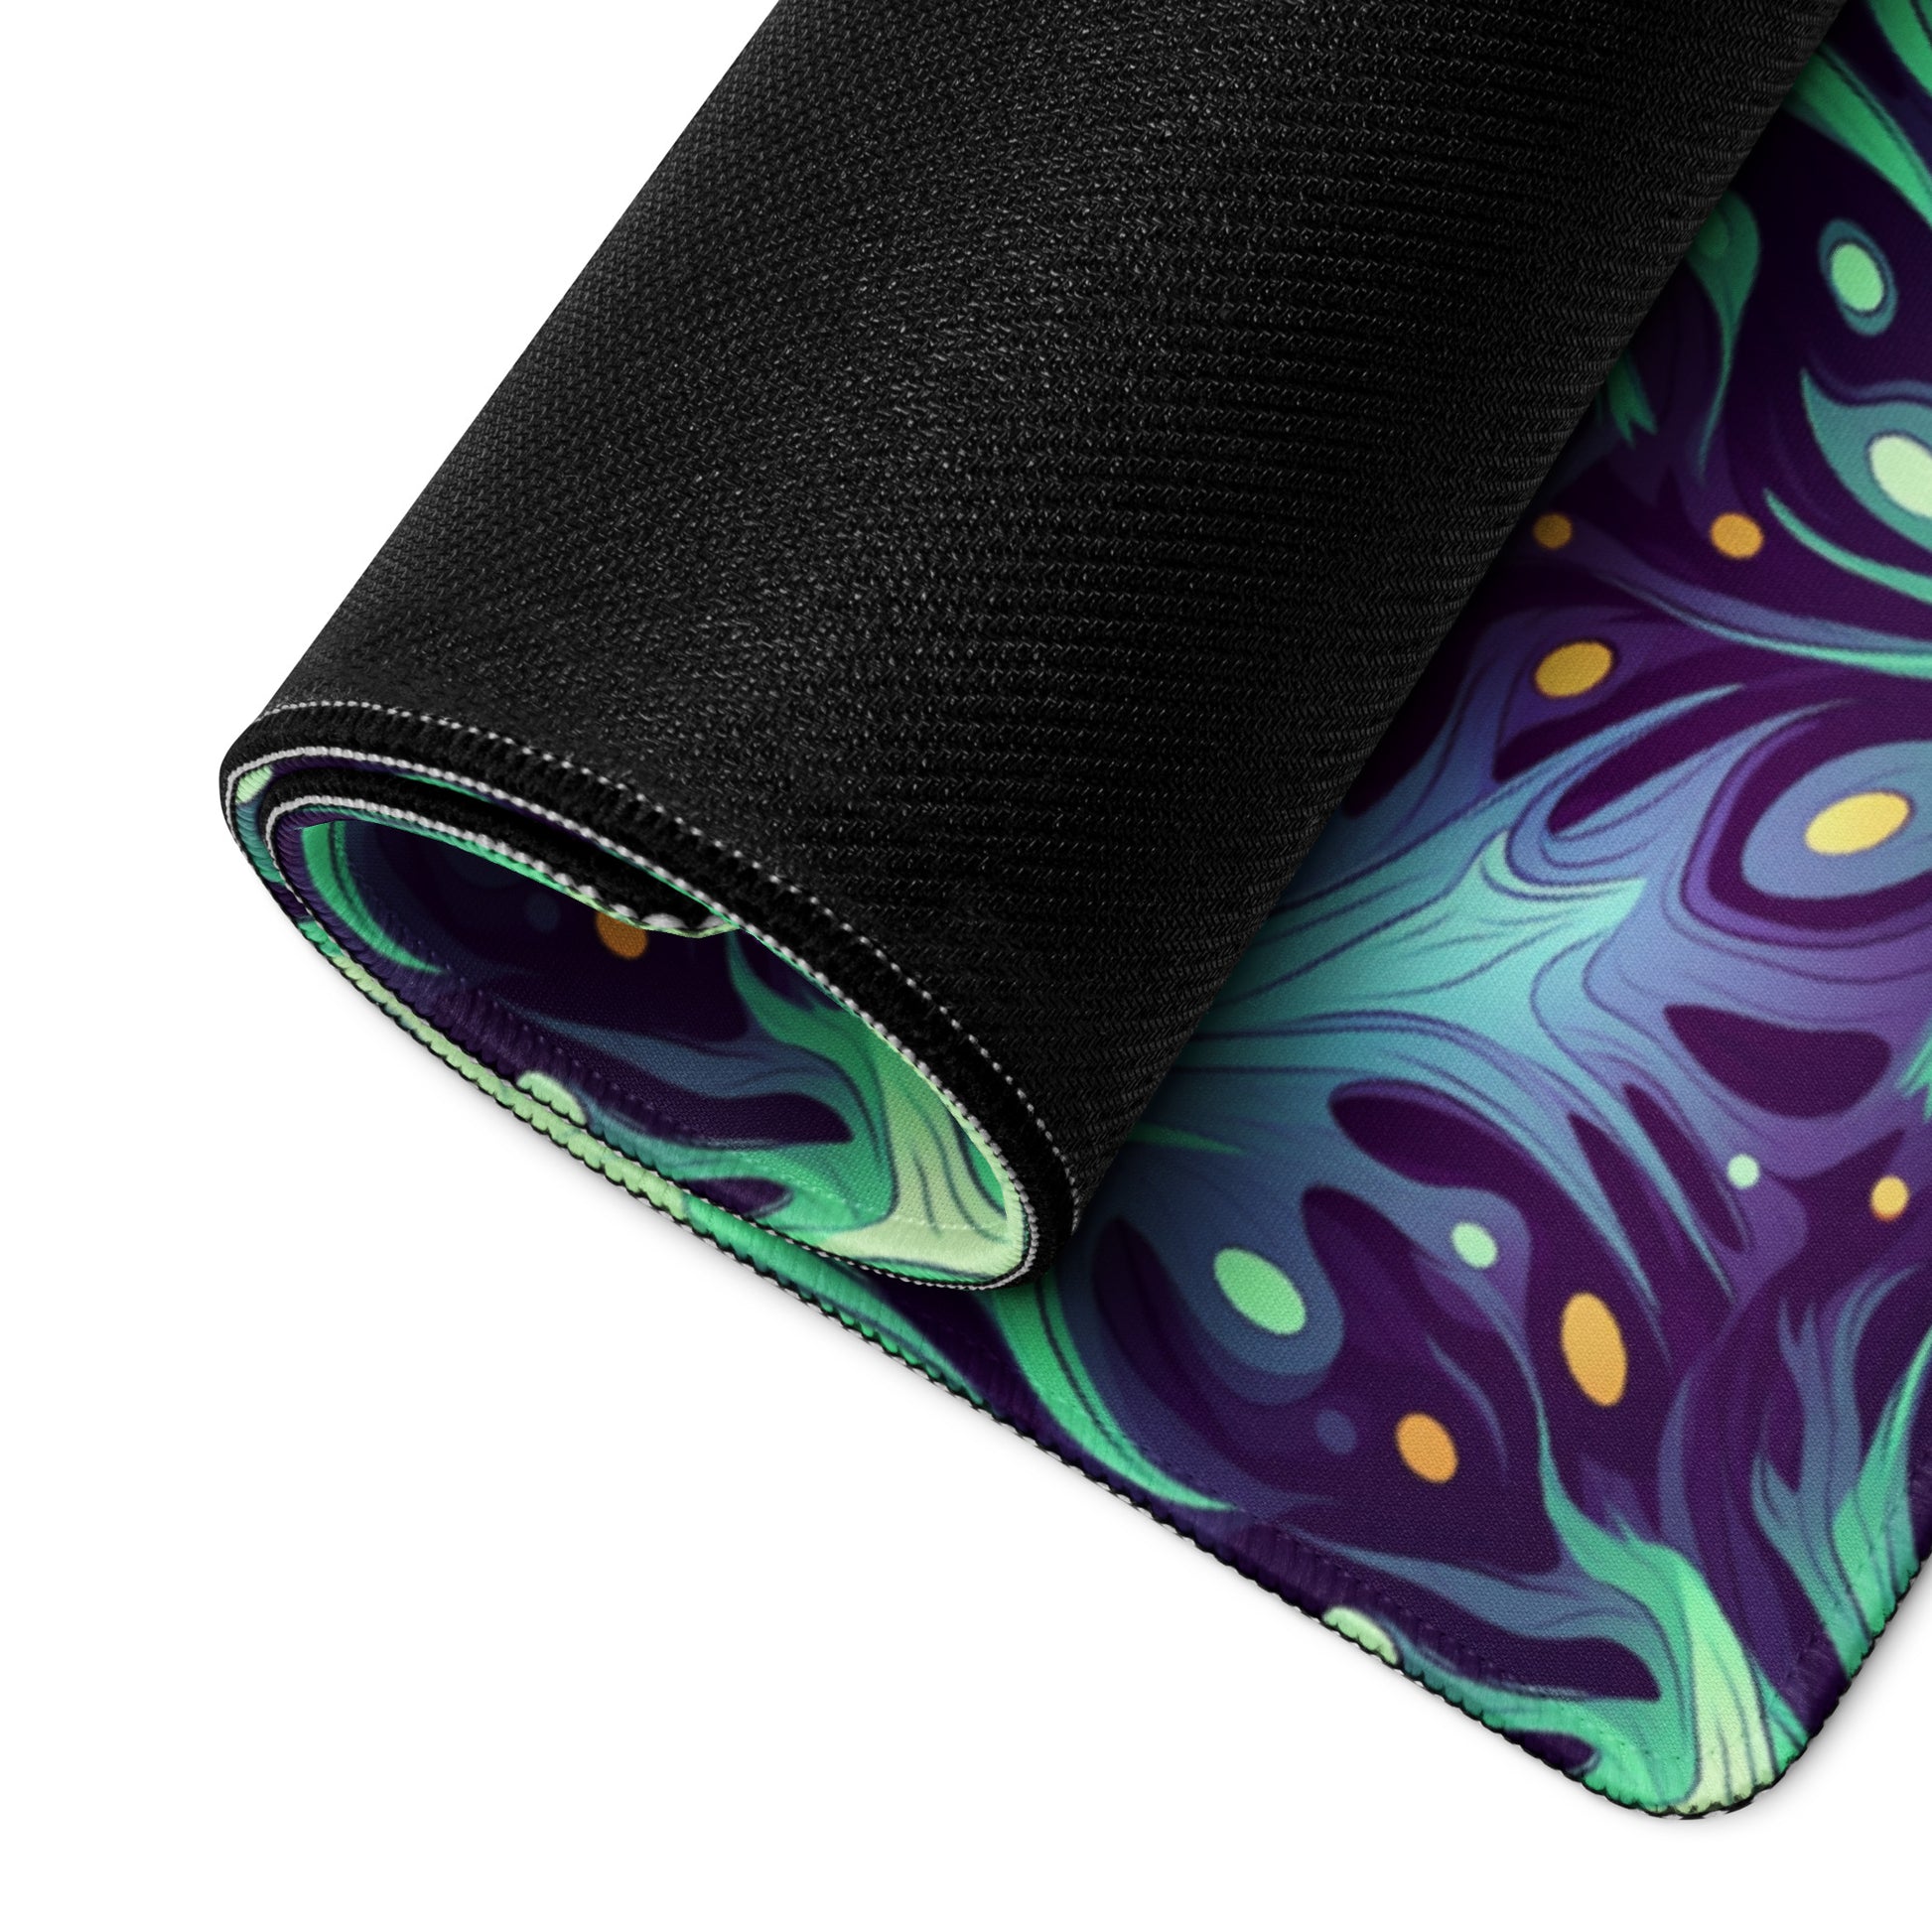 A 36" x 18" desk pad with a green and blue abstract pattern rolled up.